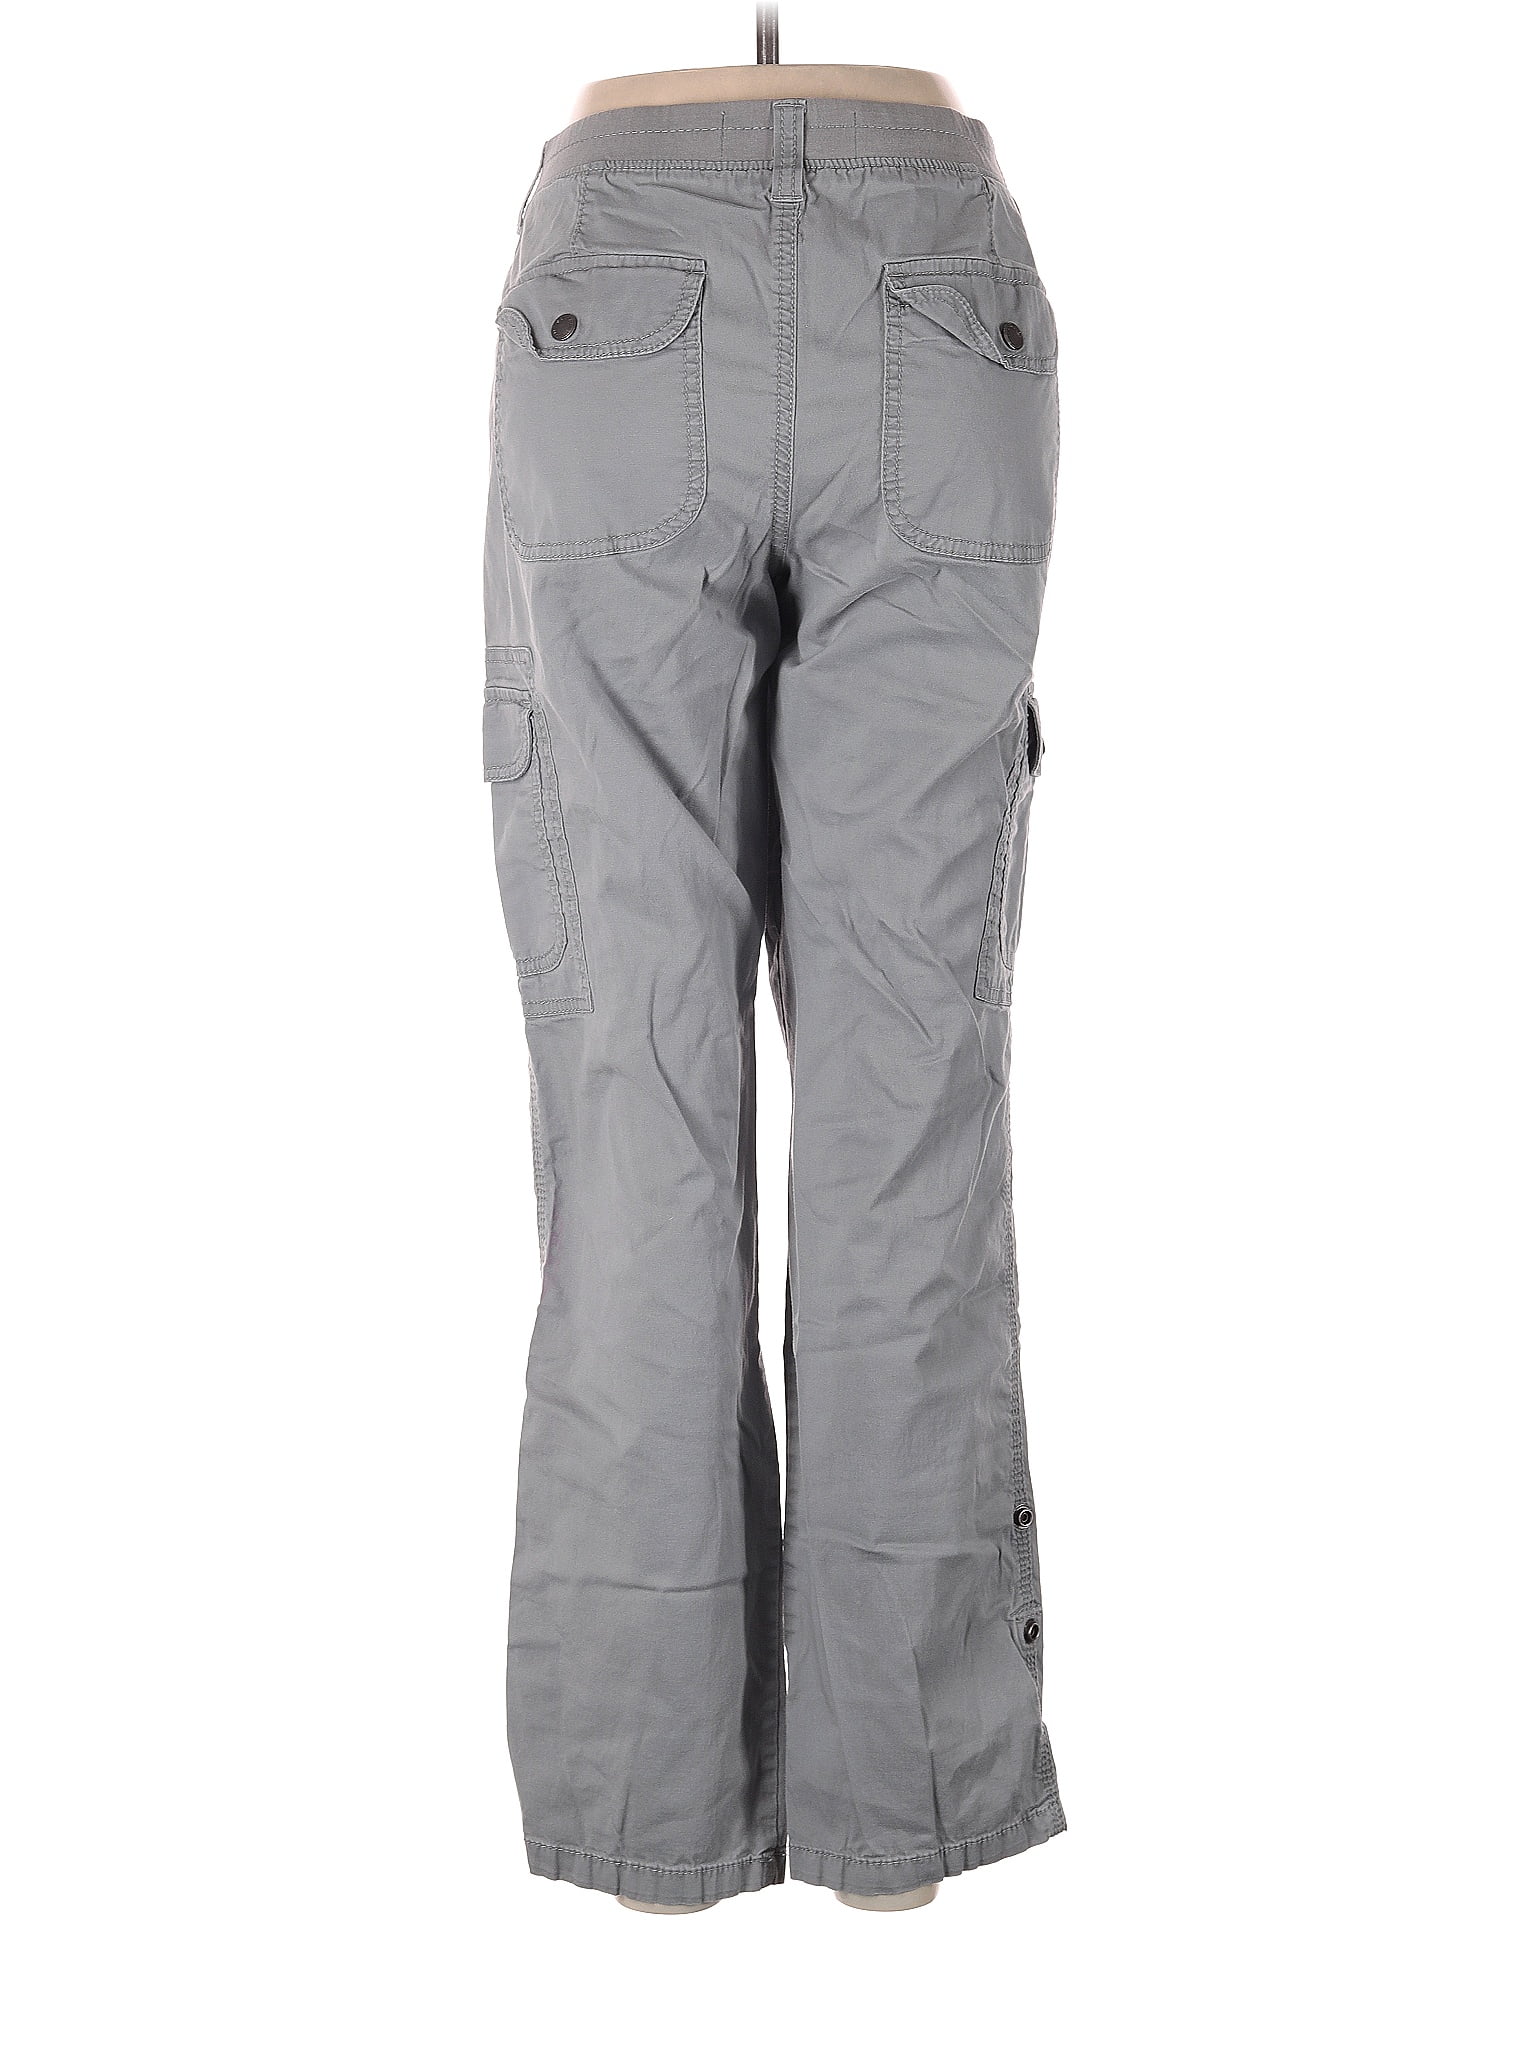 SONOMA life + style Solid Gray Cargo Pants Size 14 - 64% off